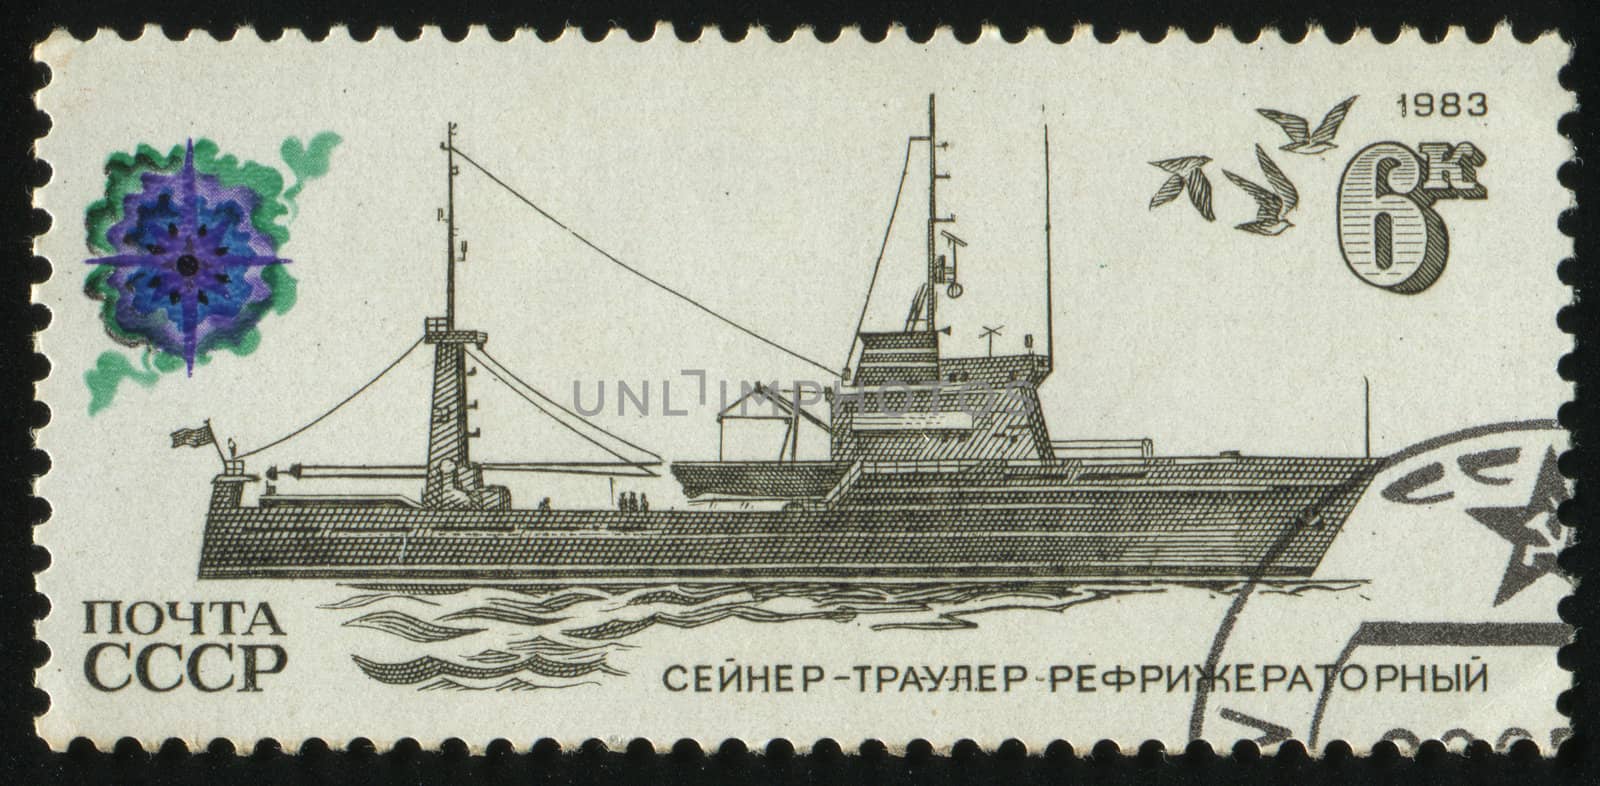 RUSSIA - CIRCA 1983: stamp printed by Russia, shows Ships of the Soviet Fishing Fleet, circa 1983.